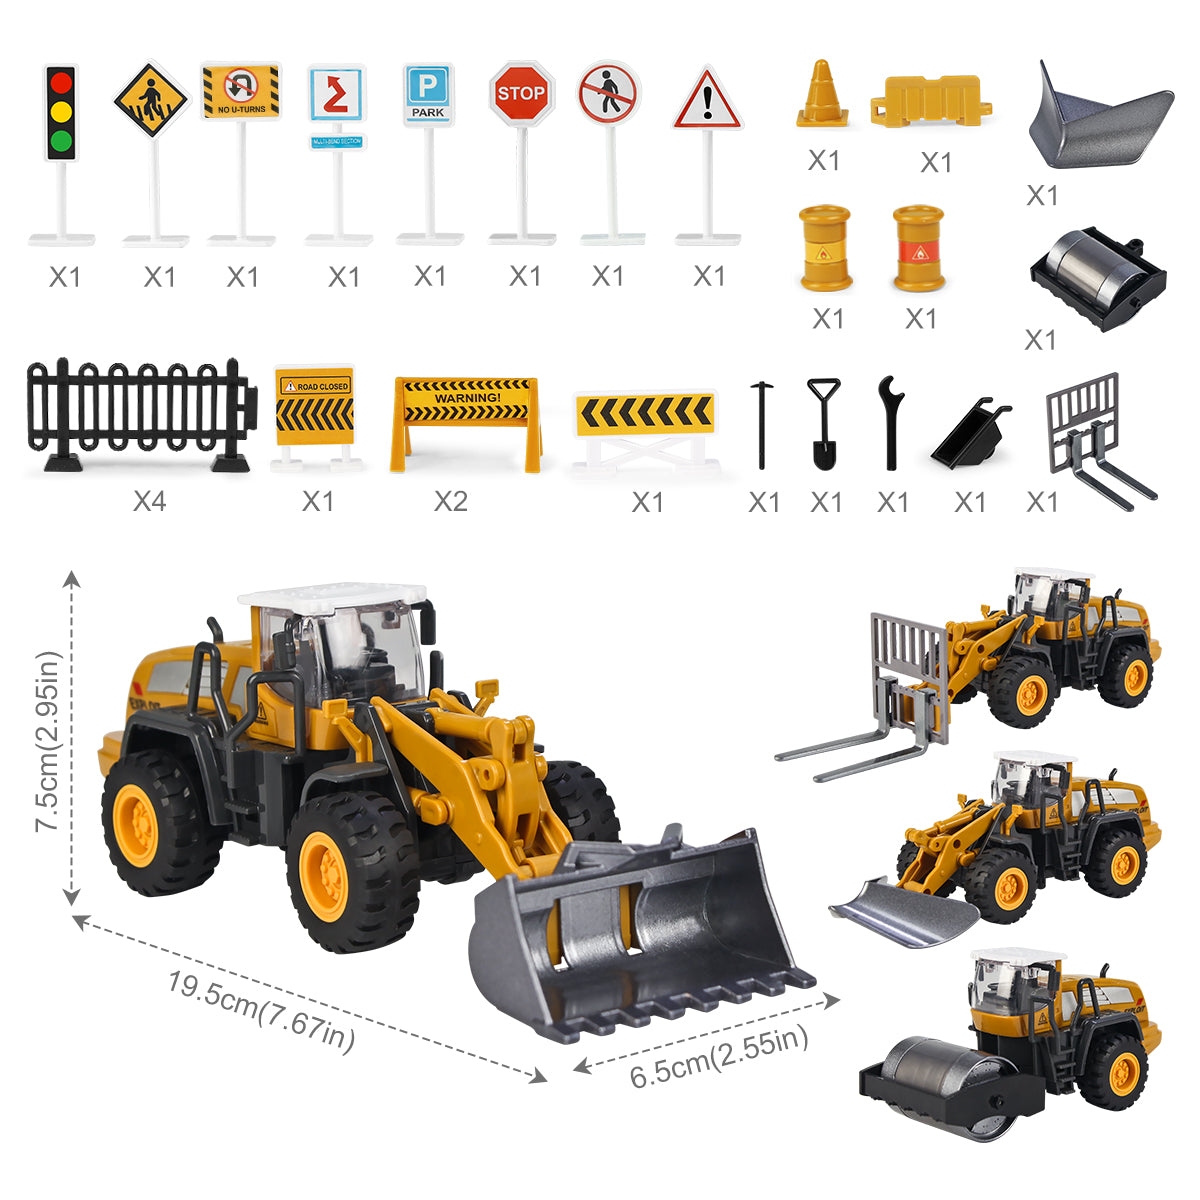 Joyfia 1: 55 Scale Construction Vehicles Trucks, Bulldozer, Forklift, Snowplow, Wheel Loader, 4 Alloy Interchangeable Parts, Kids Engineering Outdoor Sandbox Toys, Gift for Boys Toddlers 3-8 Years Old